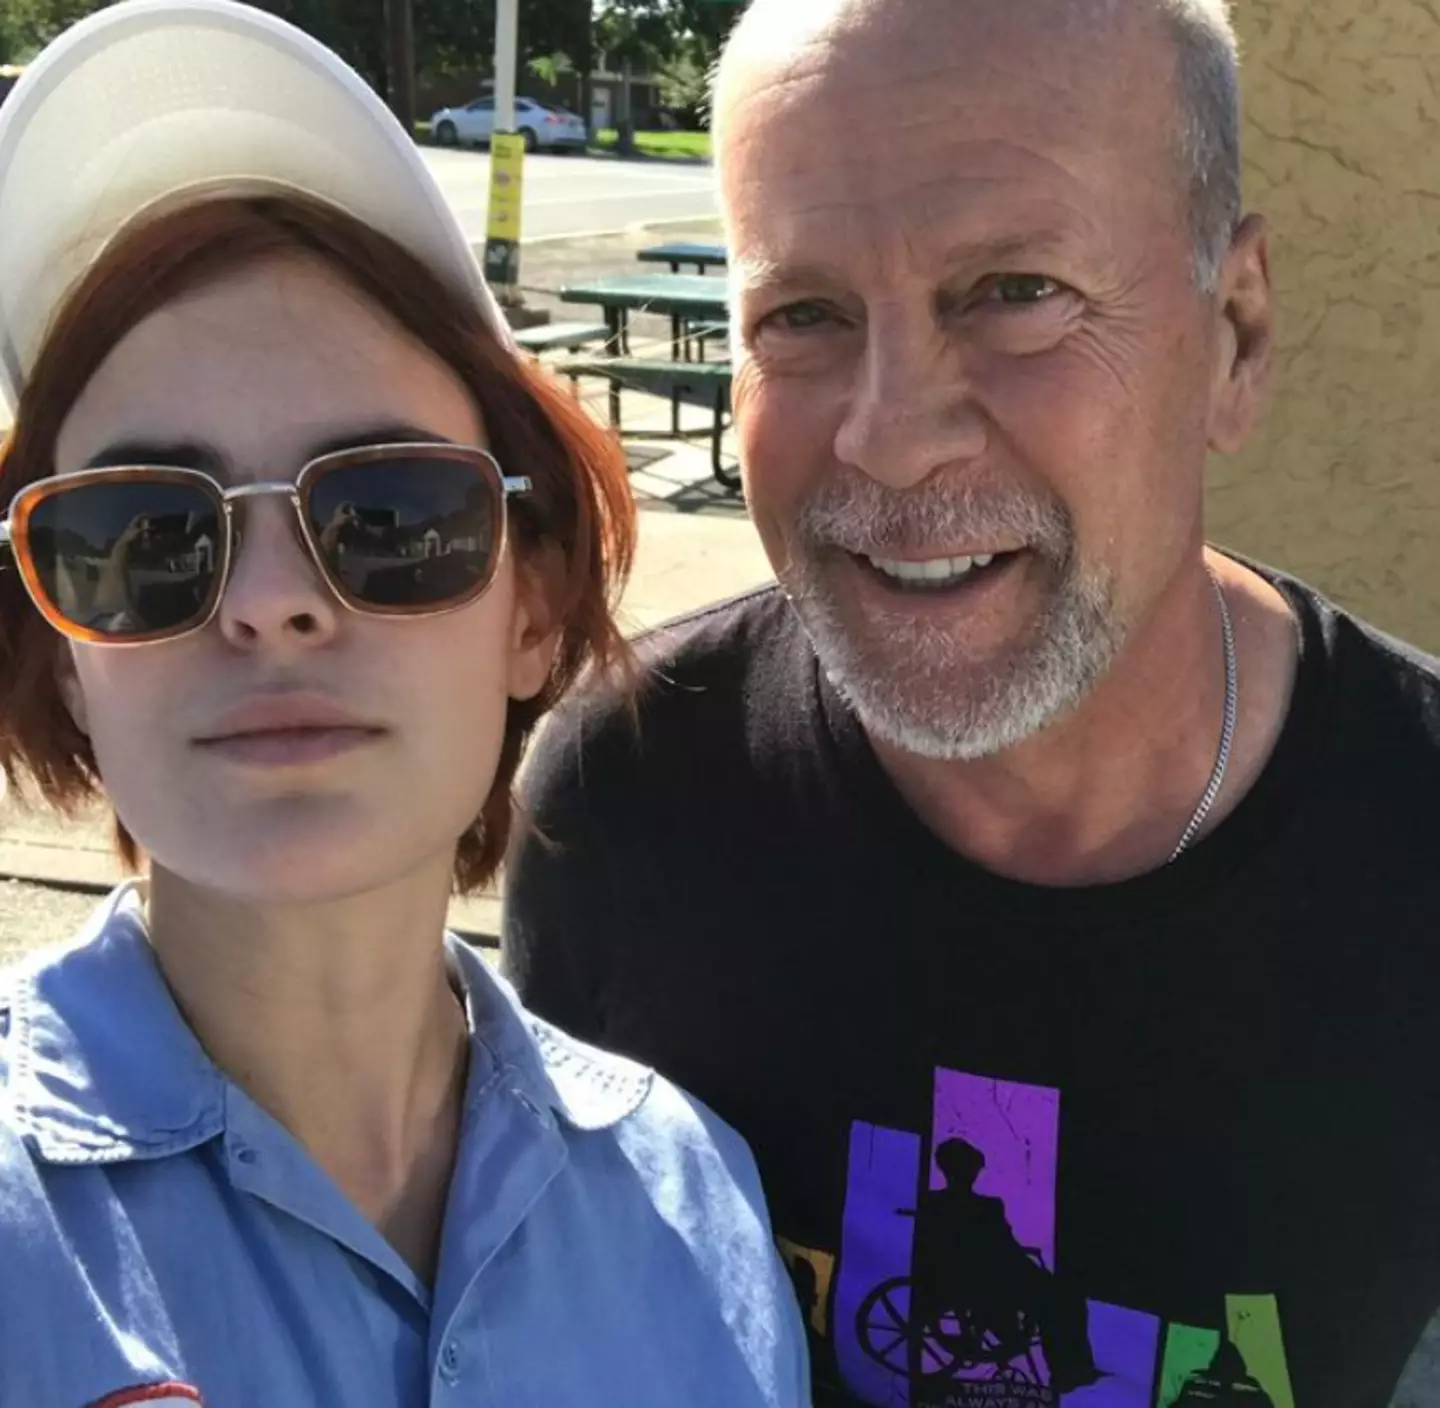 Bruce Willis' daughter hit back at a critic who questioned why she was taking pictures of her dad when he had dementia.